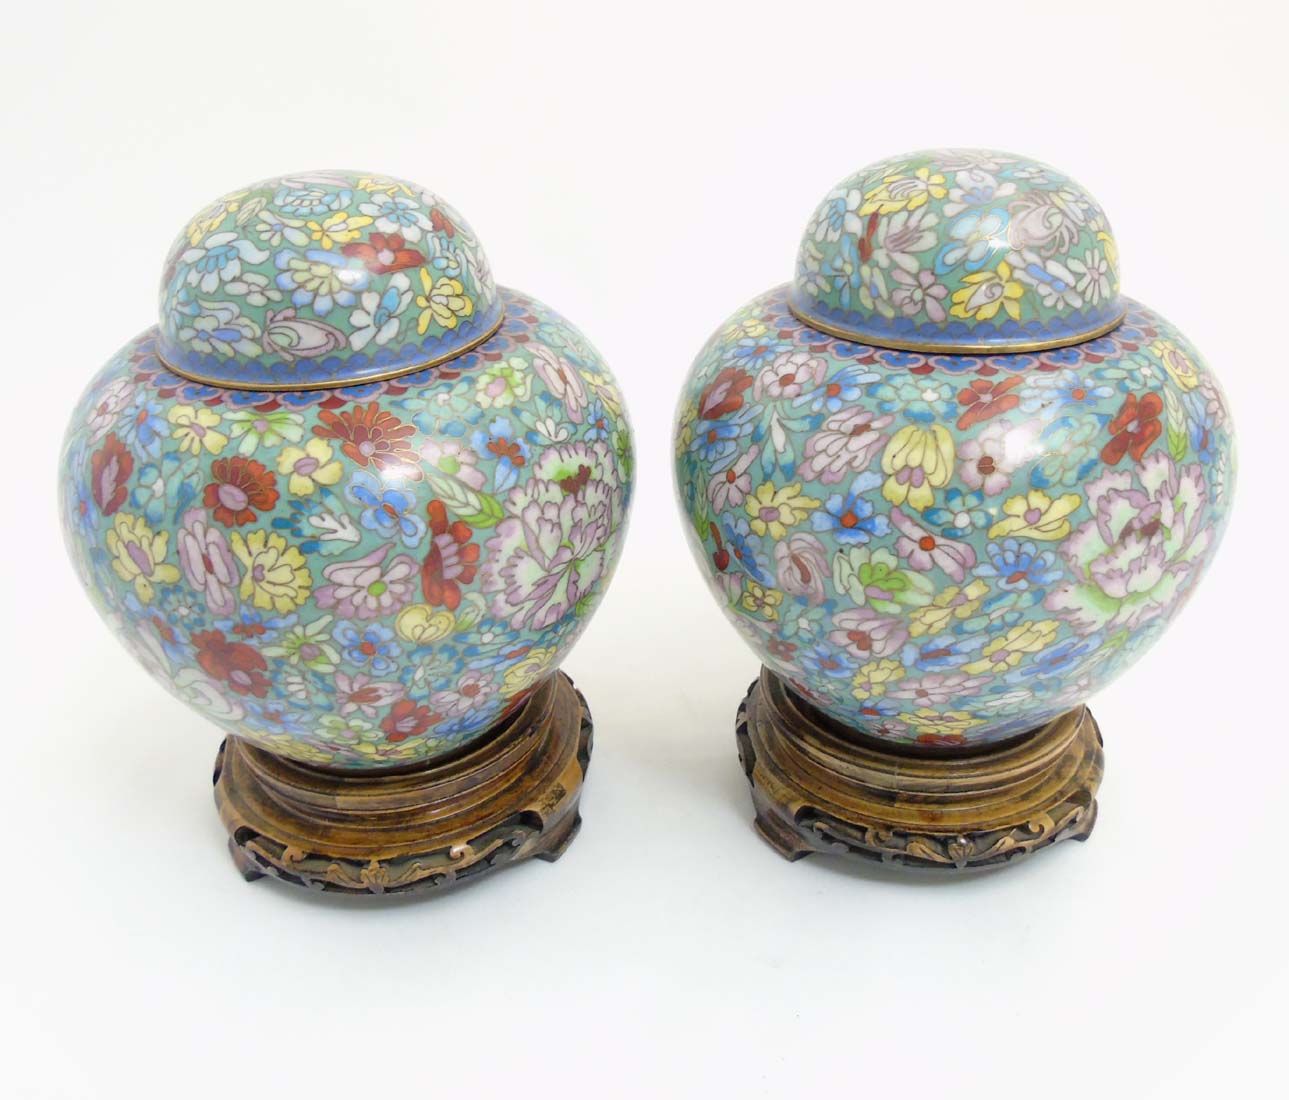 A pair of cloisonne gilt brass Ginger jars on stands with floral decoration. - Image 2 of 9